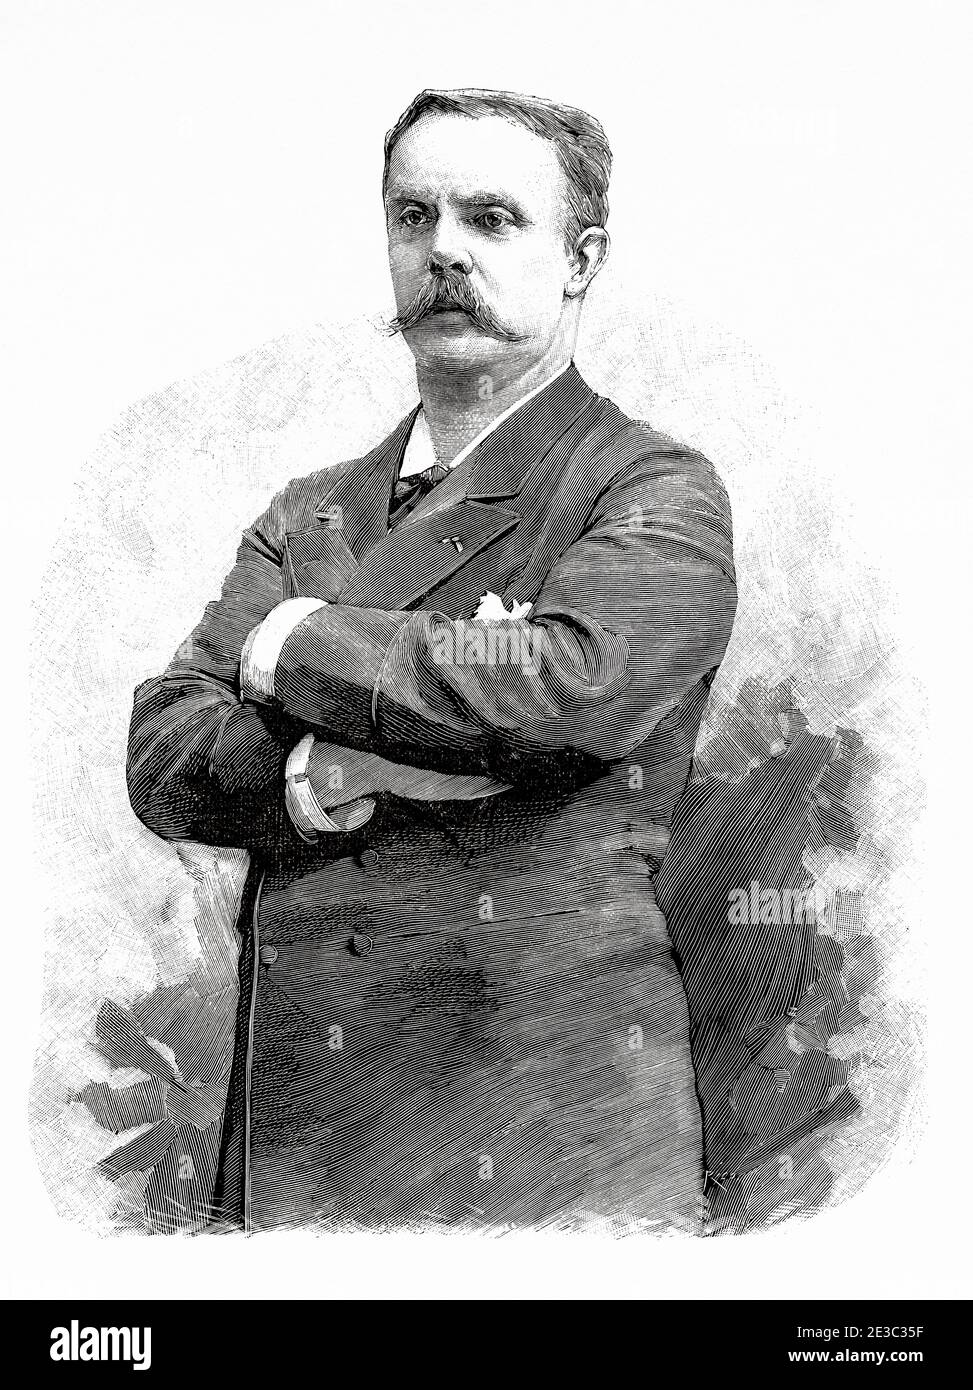 Portrait of the French politician Jean Casimir-Perier (París 1847 - 1907) President of the French Republic, France. Old XIX century engraved illustration from La Ilustracion Española y Americana 1894 Stock Photo